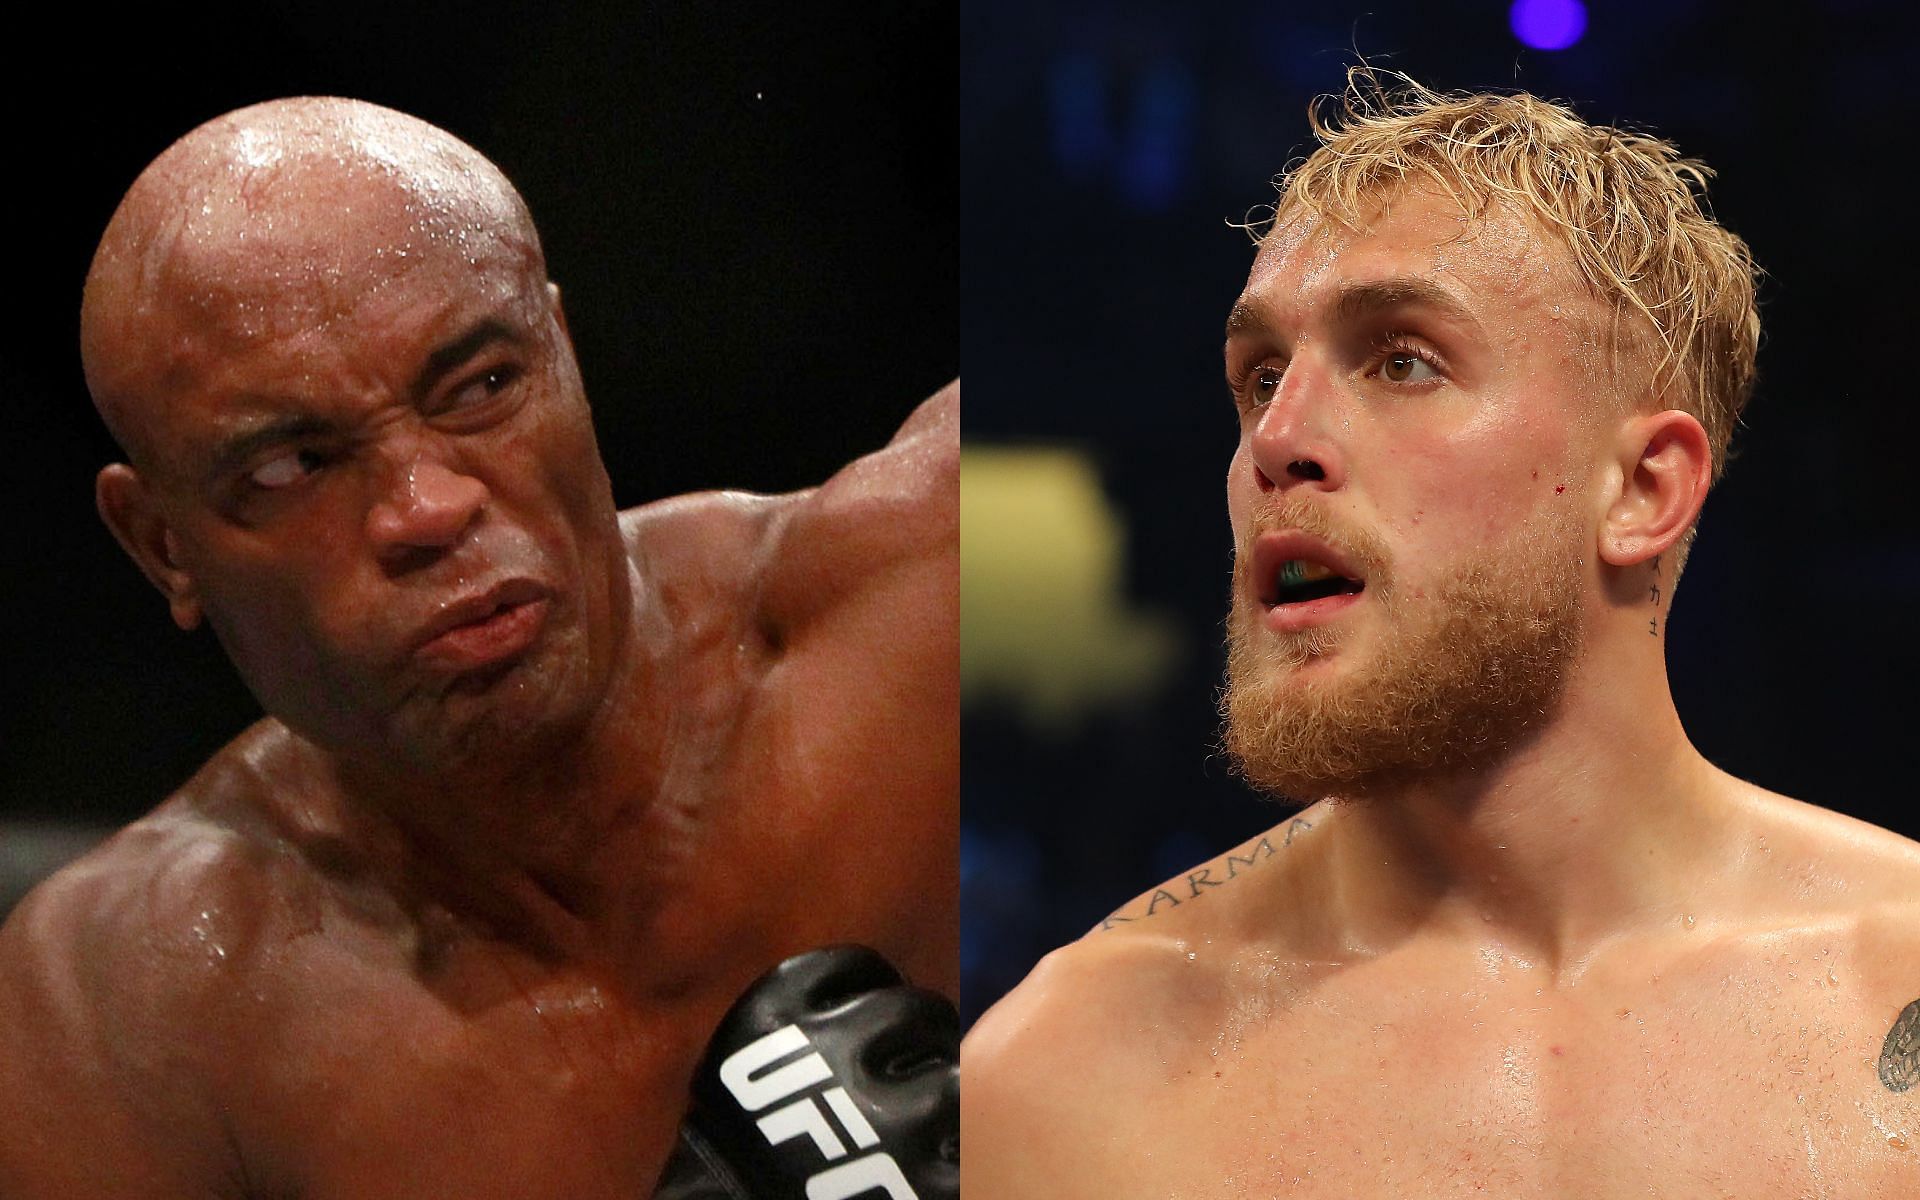 Anderson Silva (left) and Jake Paul (right) (Images via Getty)